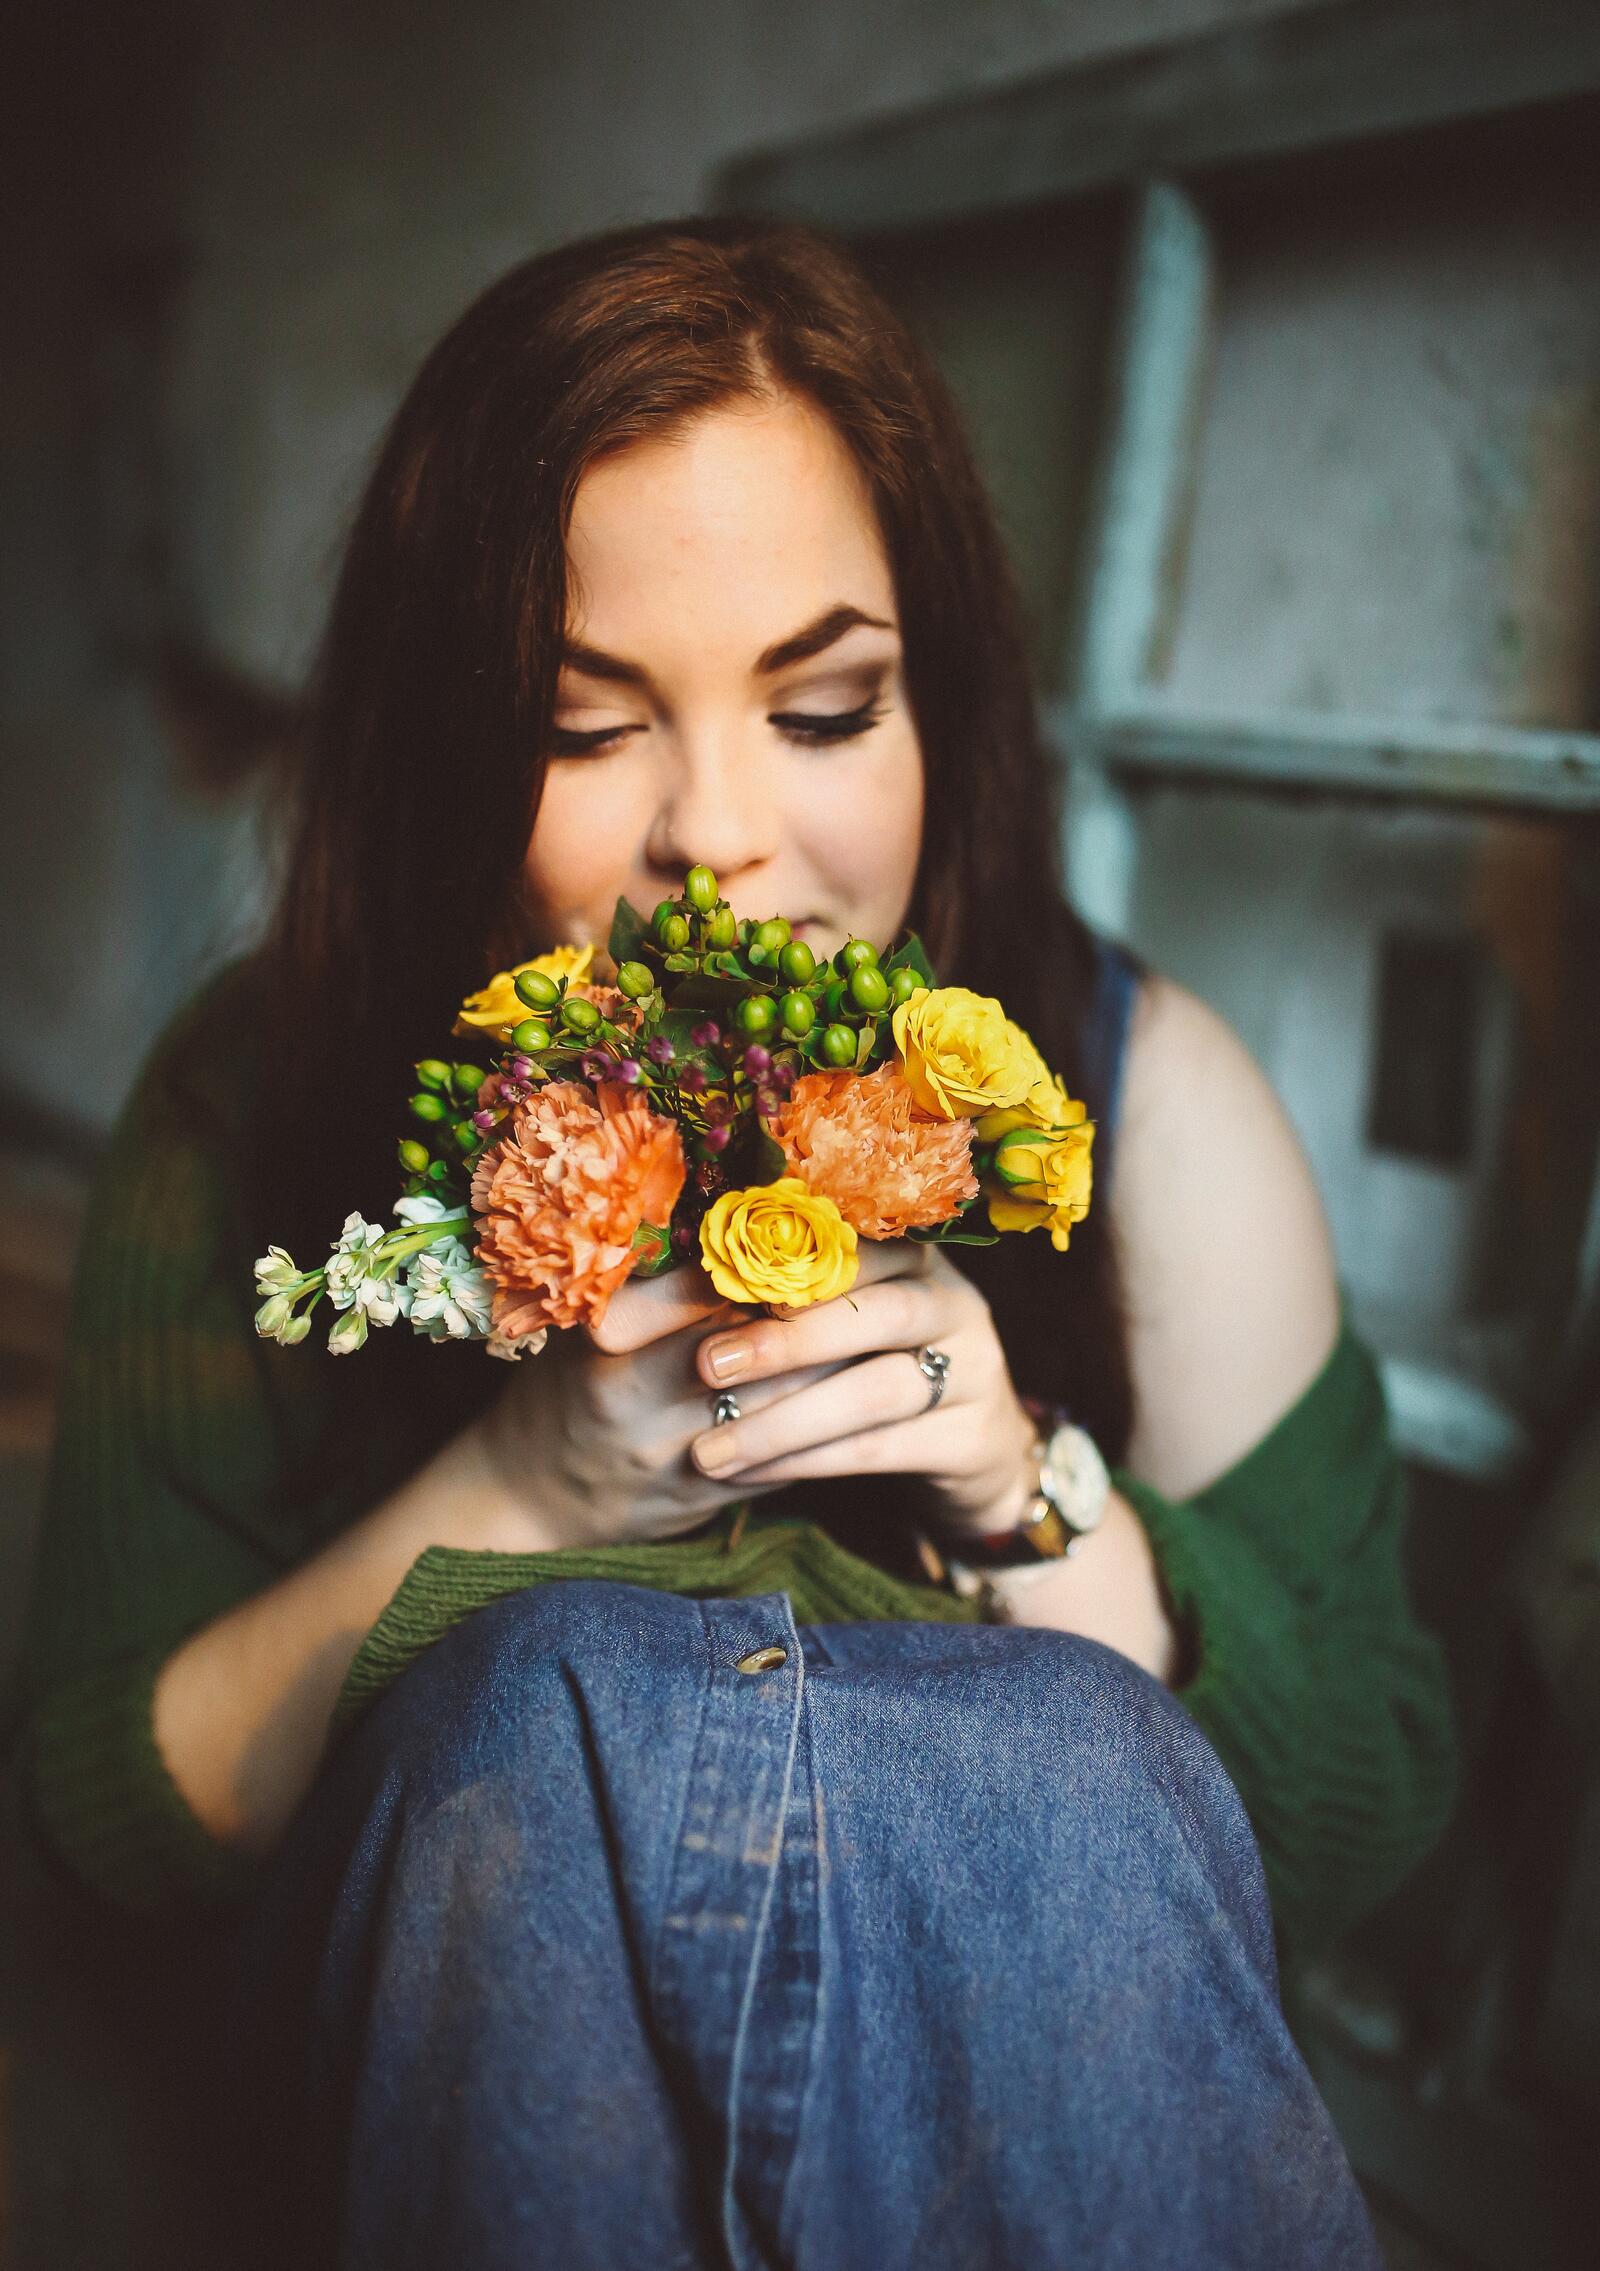 Free photo Dark-haired girl admiring a bouquet of flowers